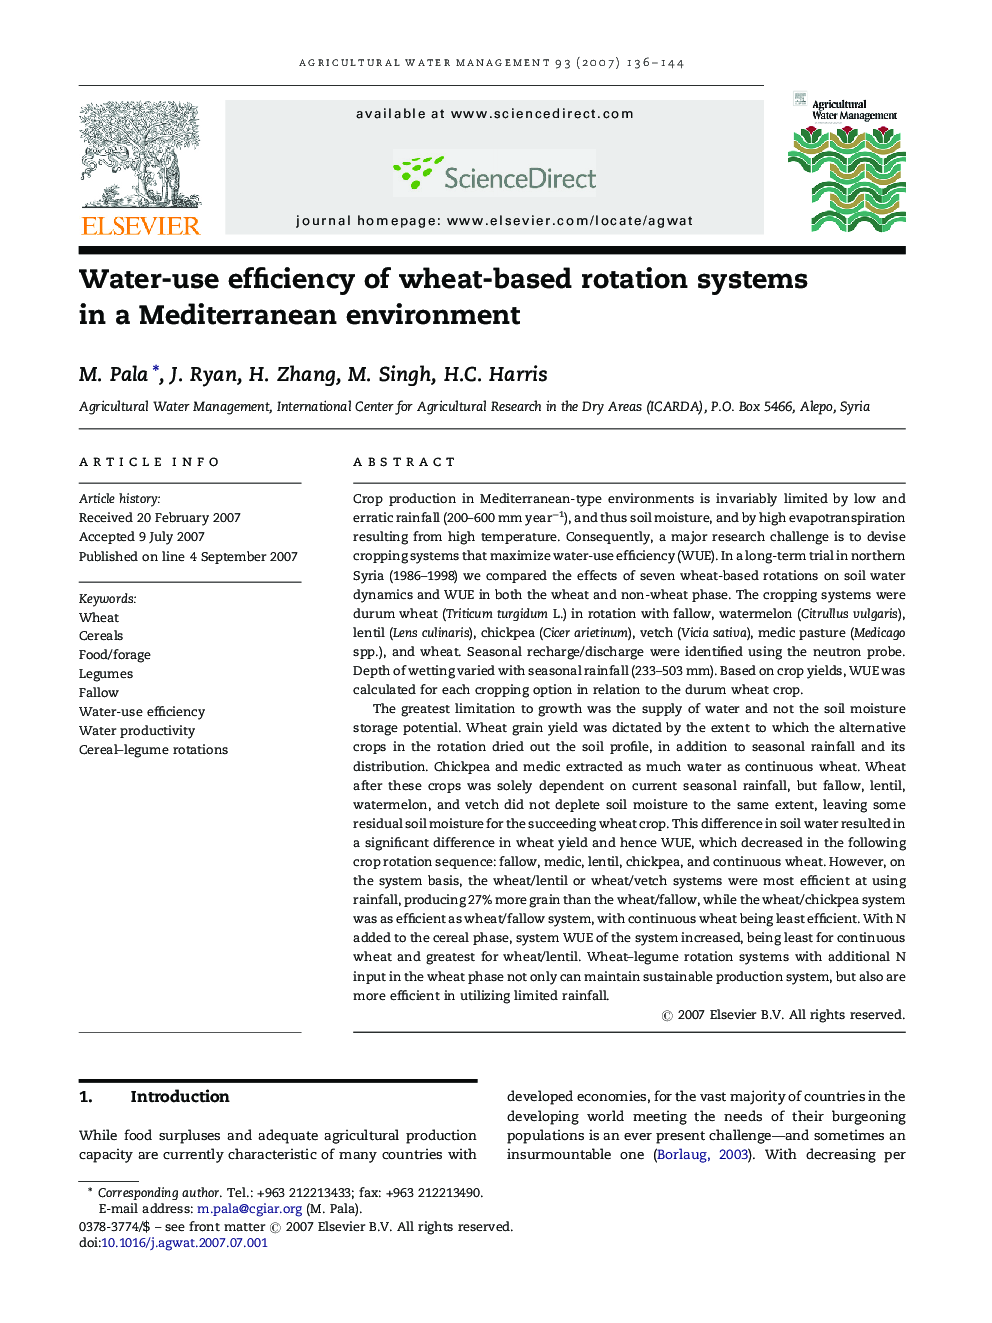 Water-use efficiency of wheat-based rotation systems in a Mediterranean environment